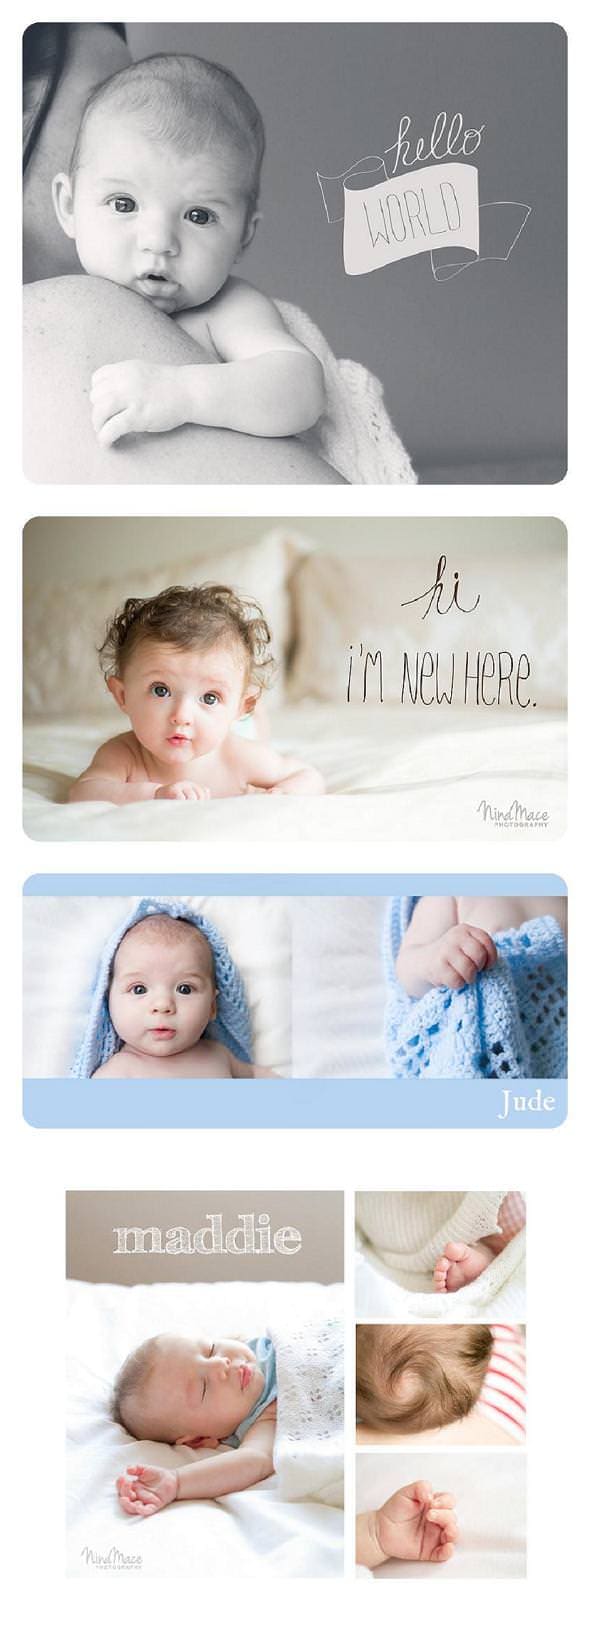 hi im new here baby images taken by Nina Mace Photography